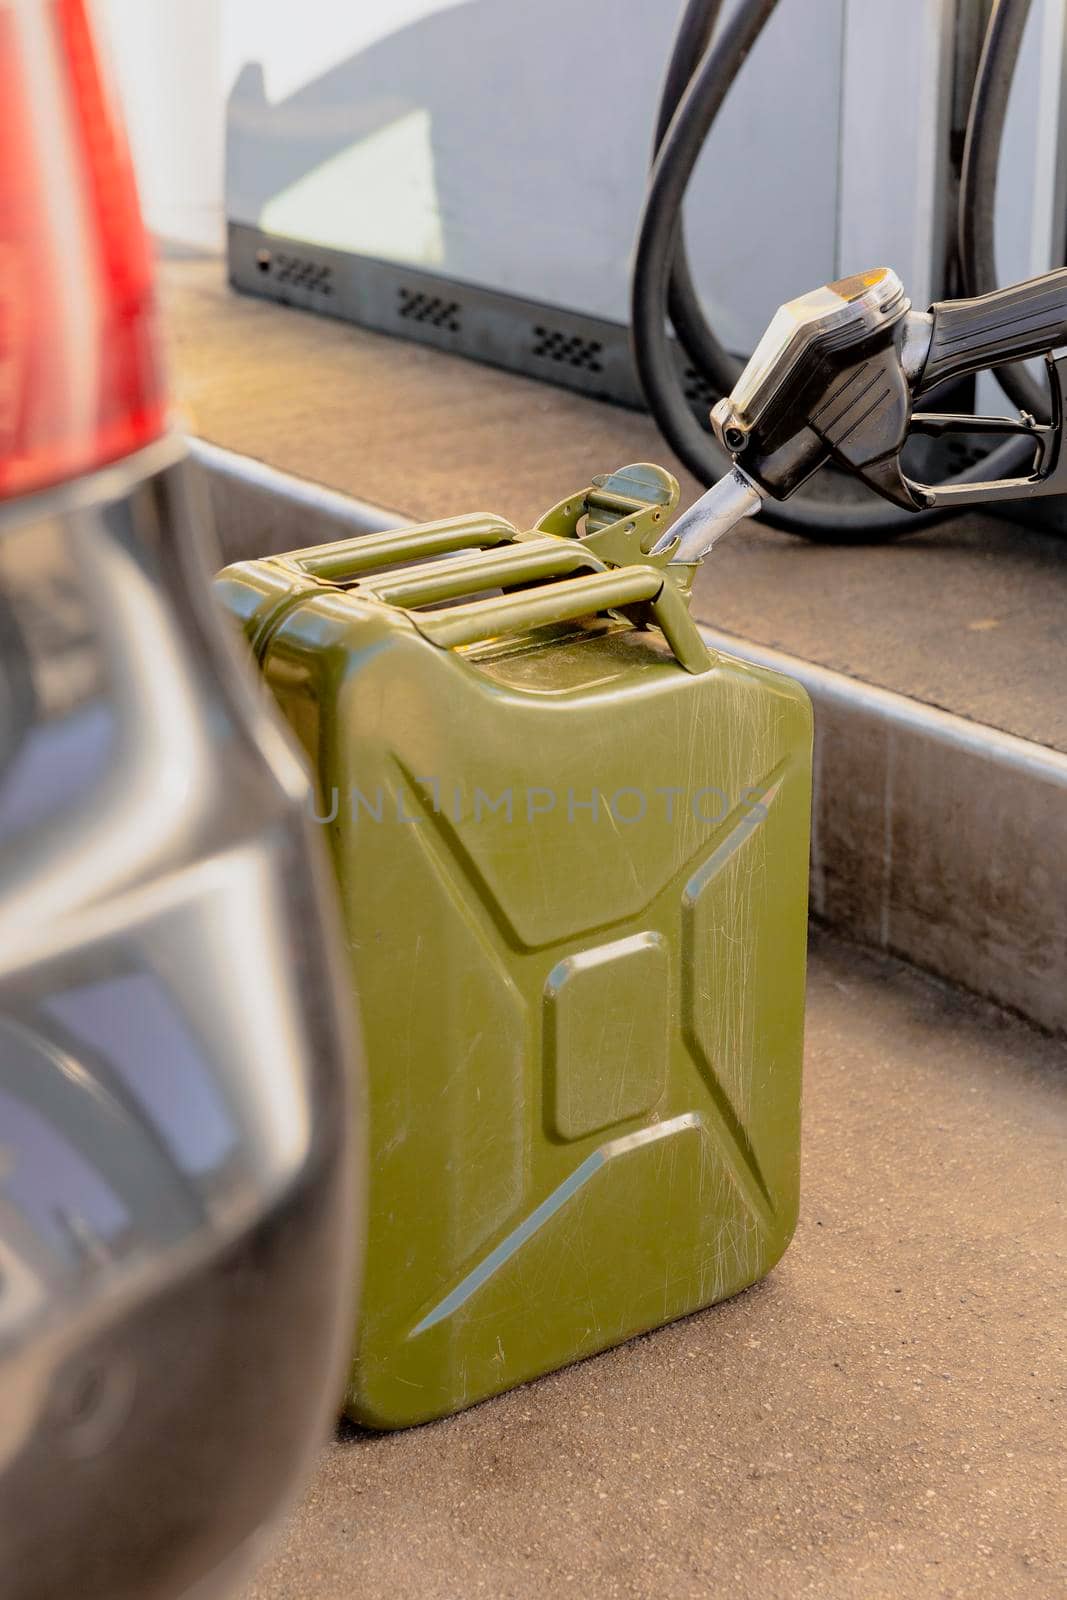 Refilling canister with fuel on the petrol station. Close up view. Fuel, gasoline, diesel is getting more expensive. Petrol industry and service. Petrol price and oil crisis concept